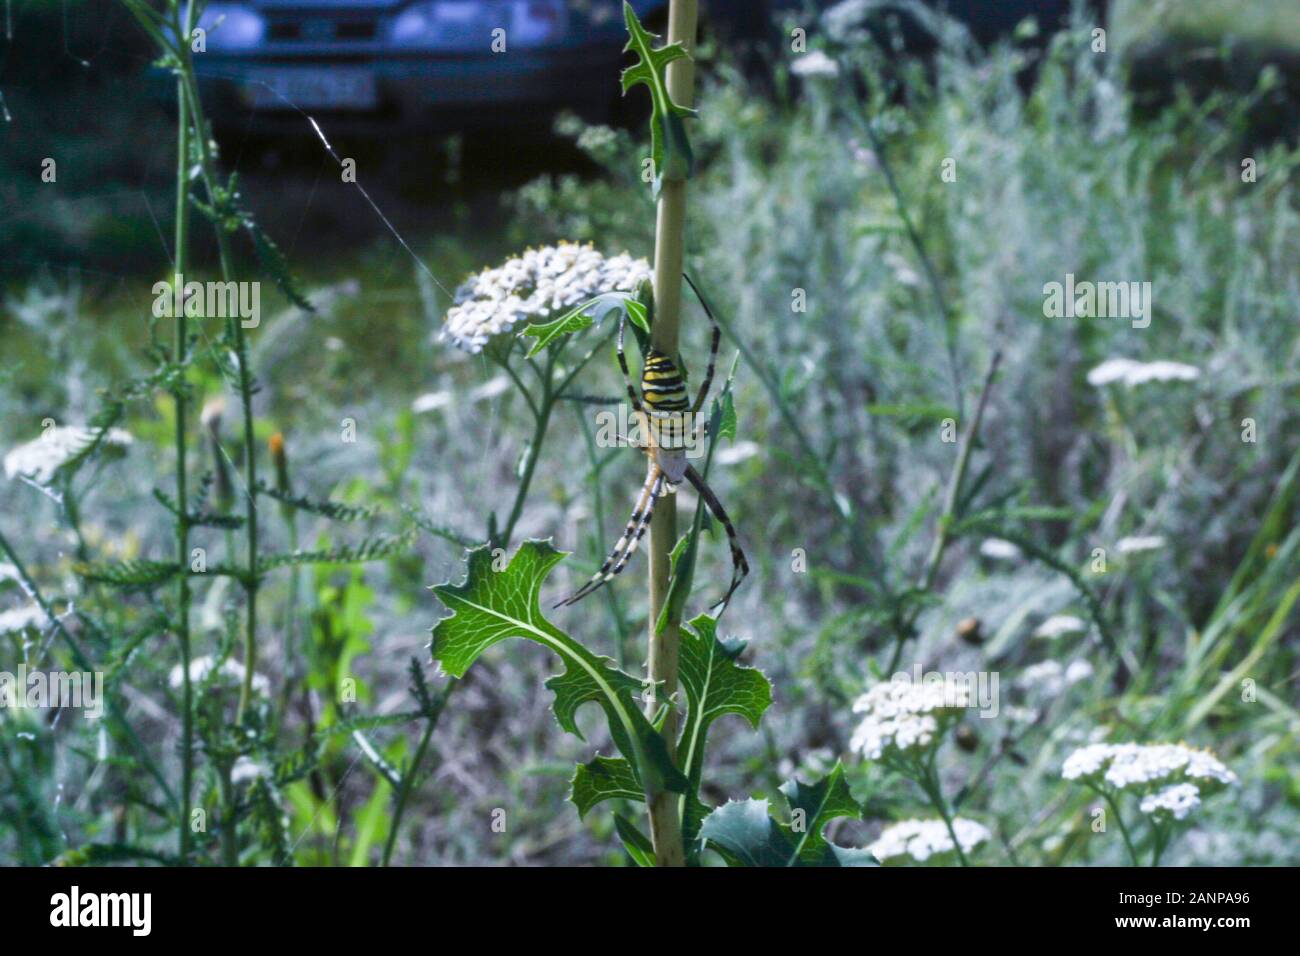 yarrow  medicinal plant with small white flowers growing in the field and a spider hunting on it Stock Photo